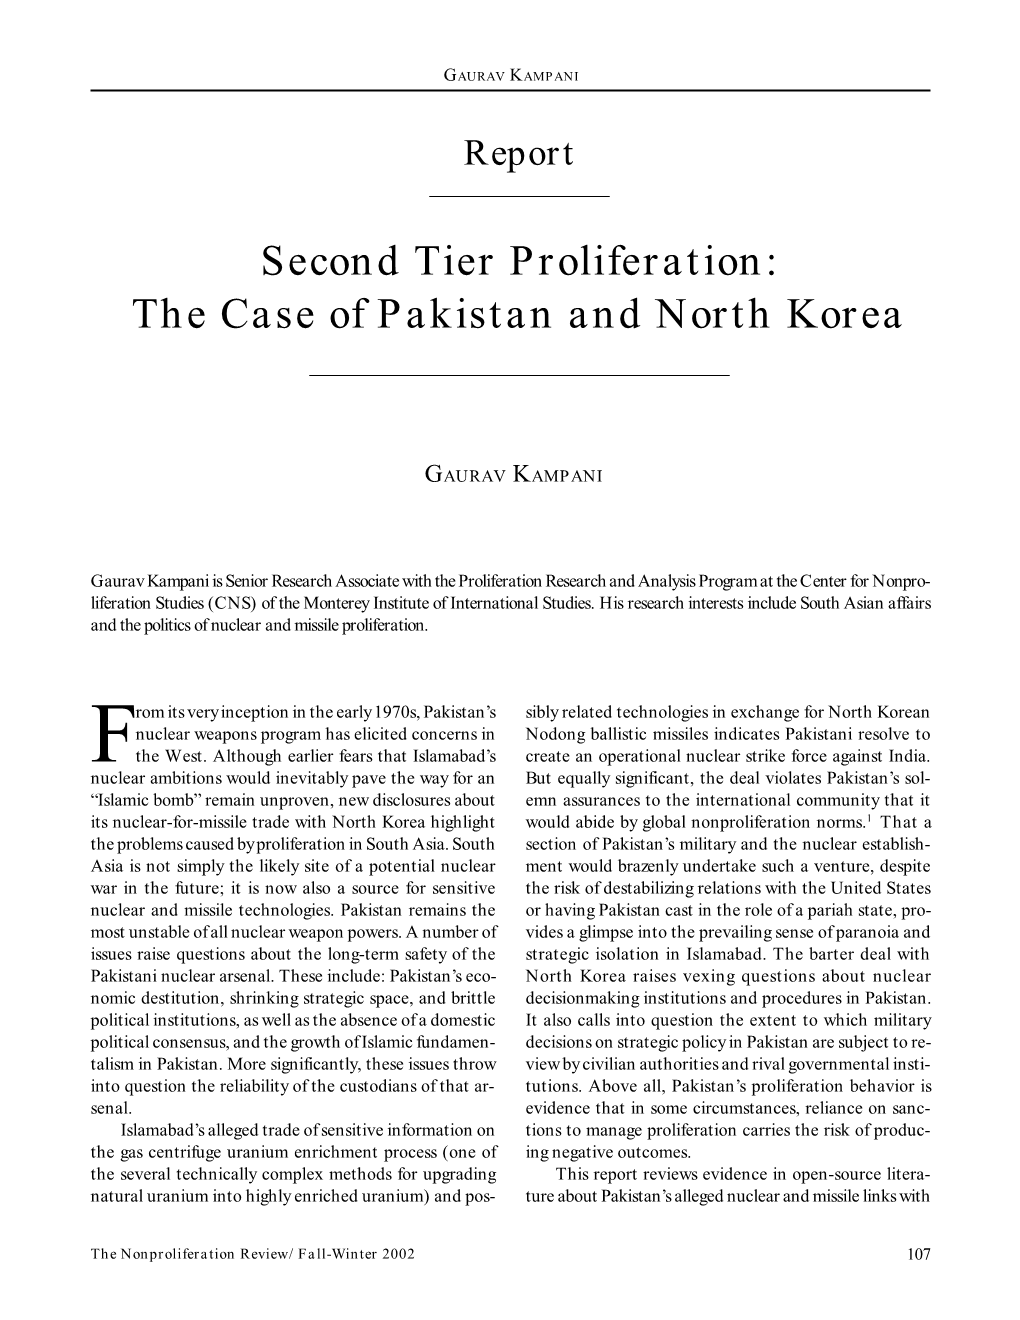 9.3: Second Tier Proliferation: the Case of Pakistan and North Korea